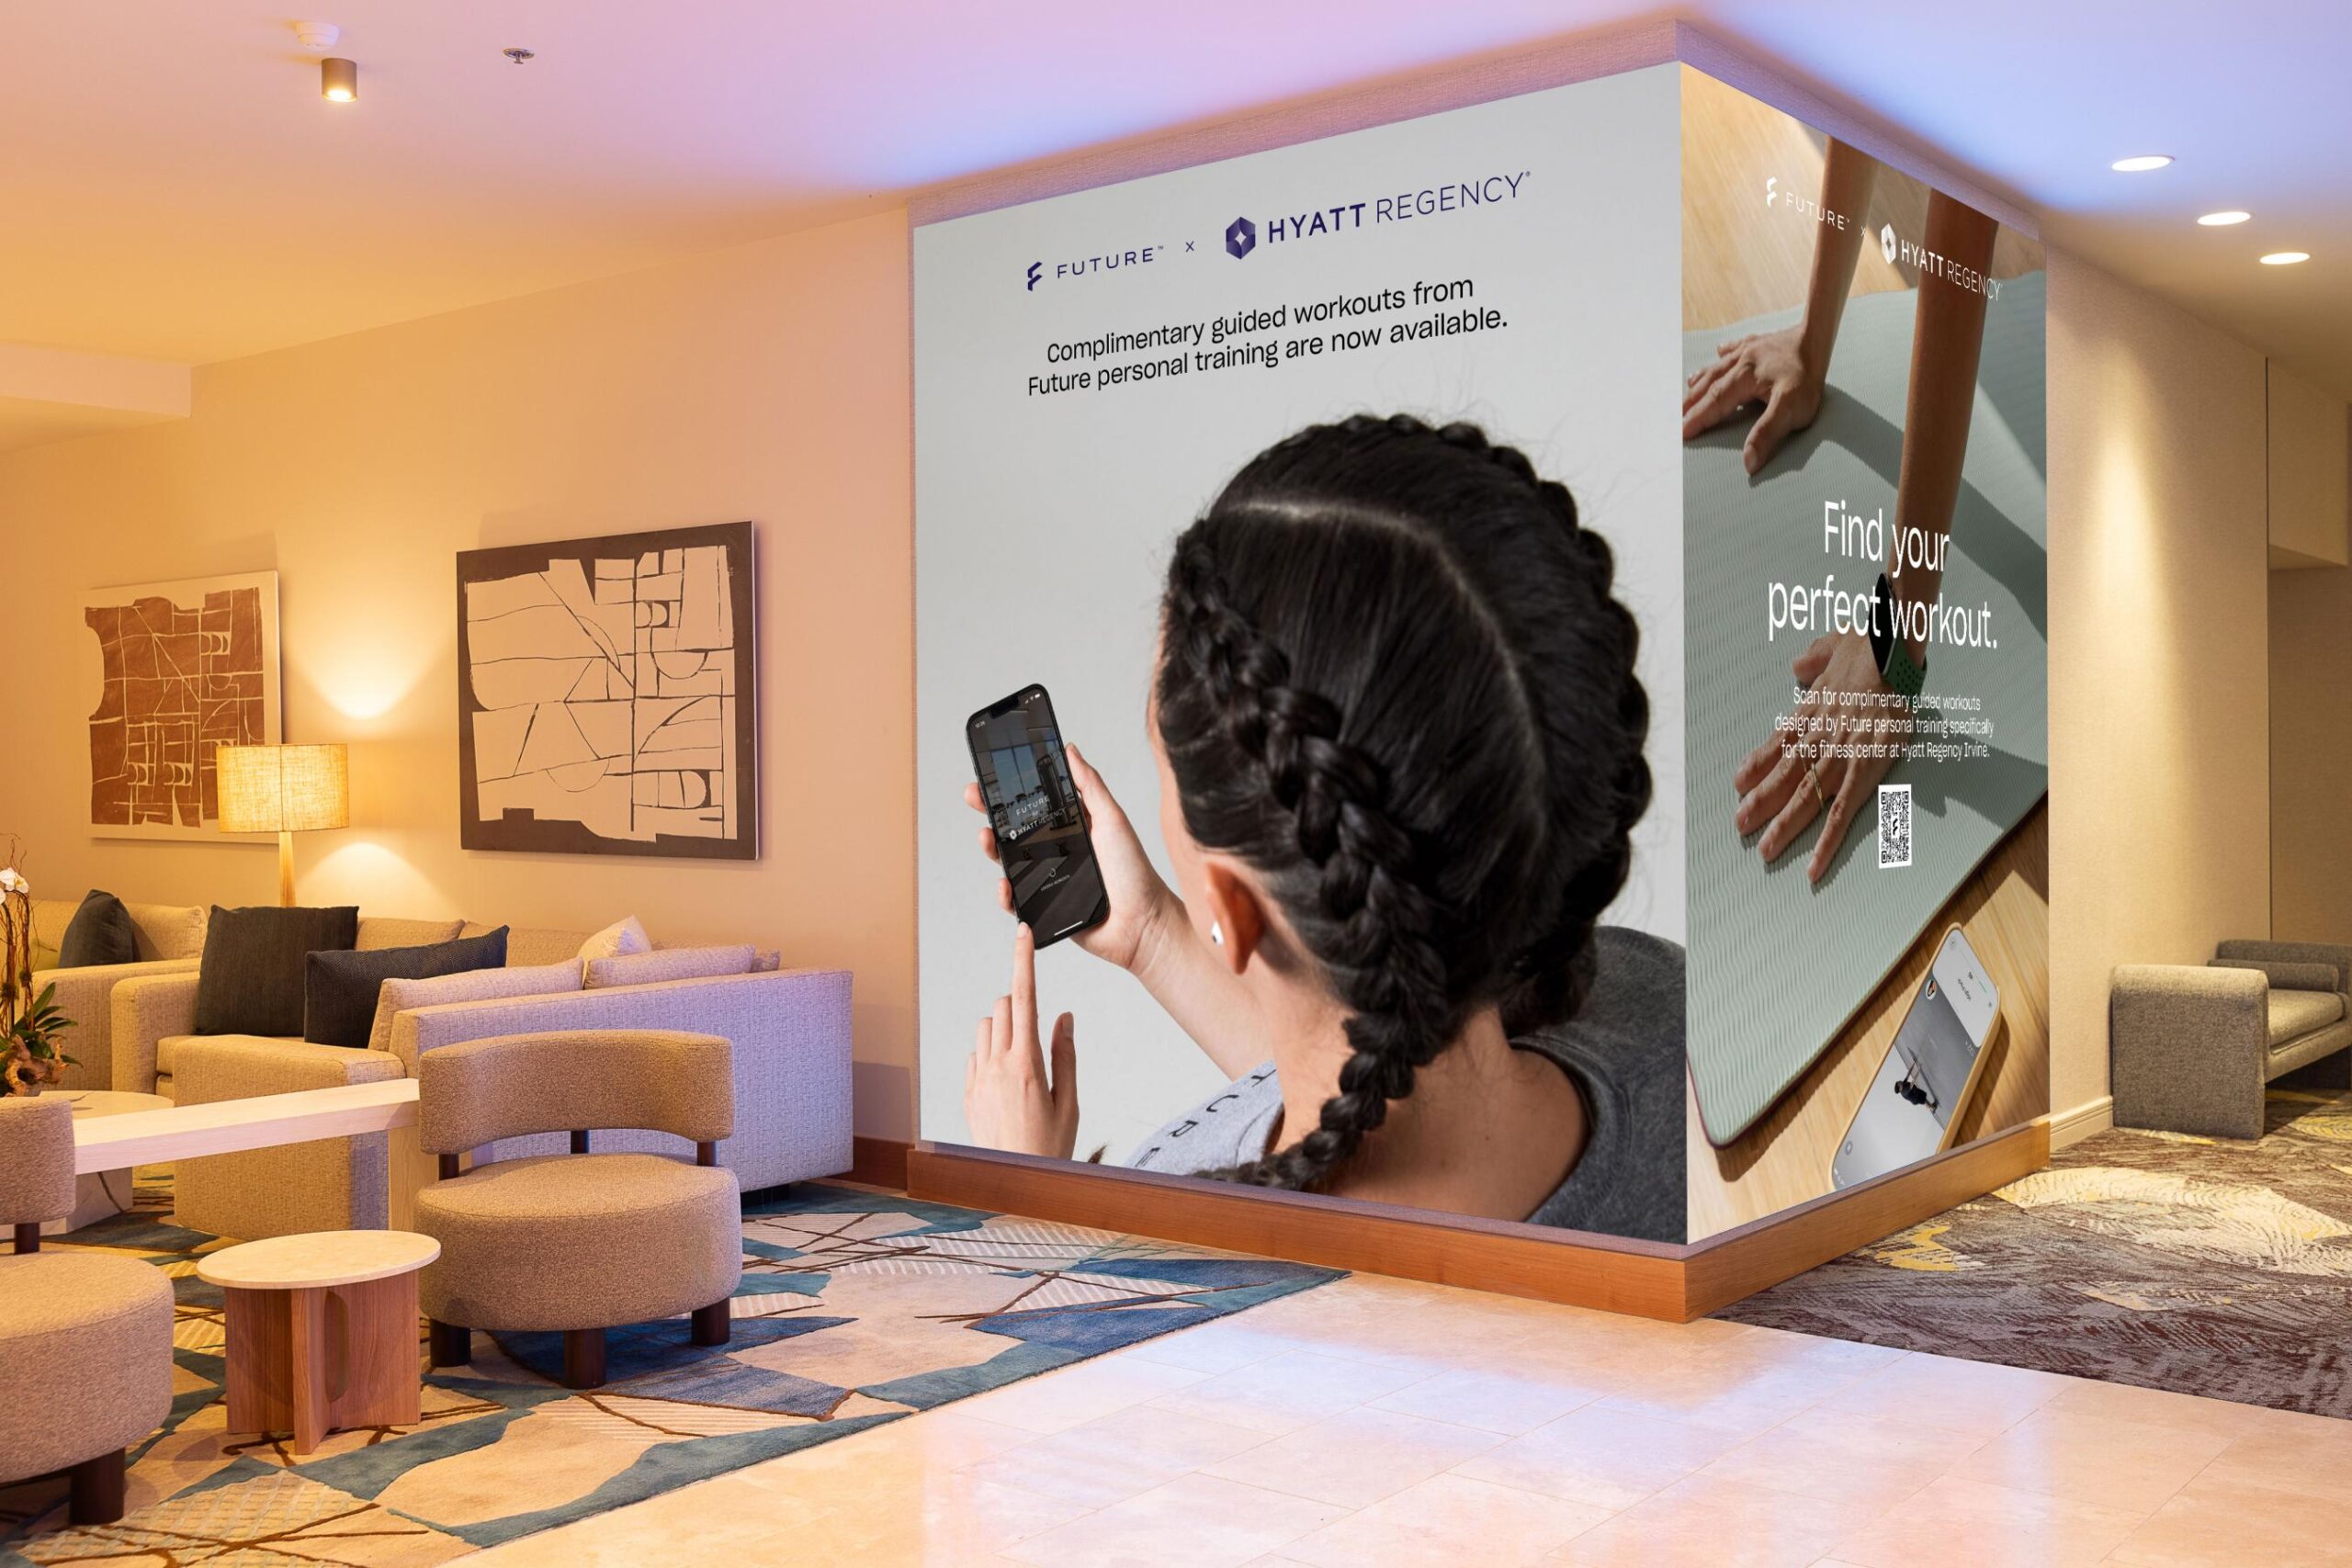 Hyatt Introducing Guided Workouts At Select Properties